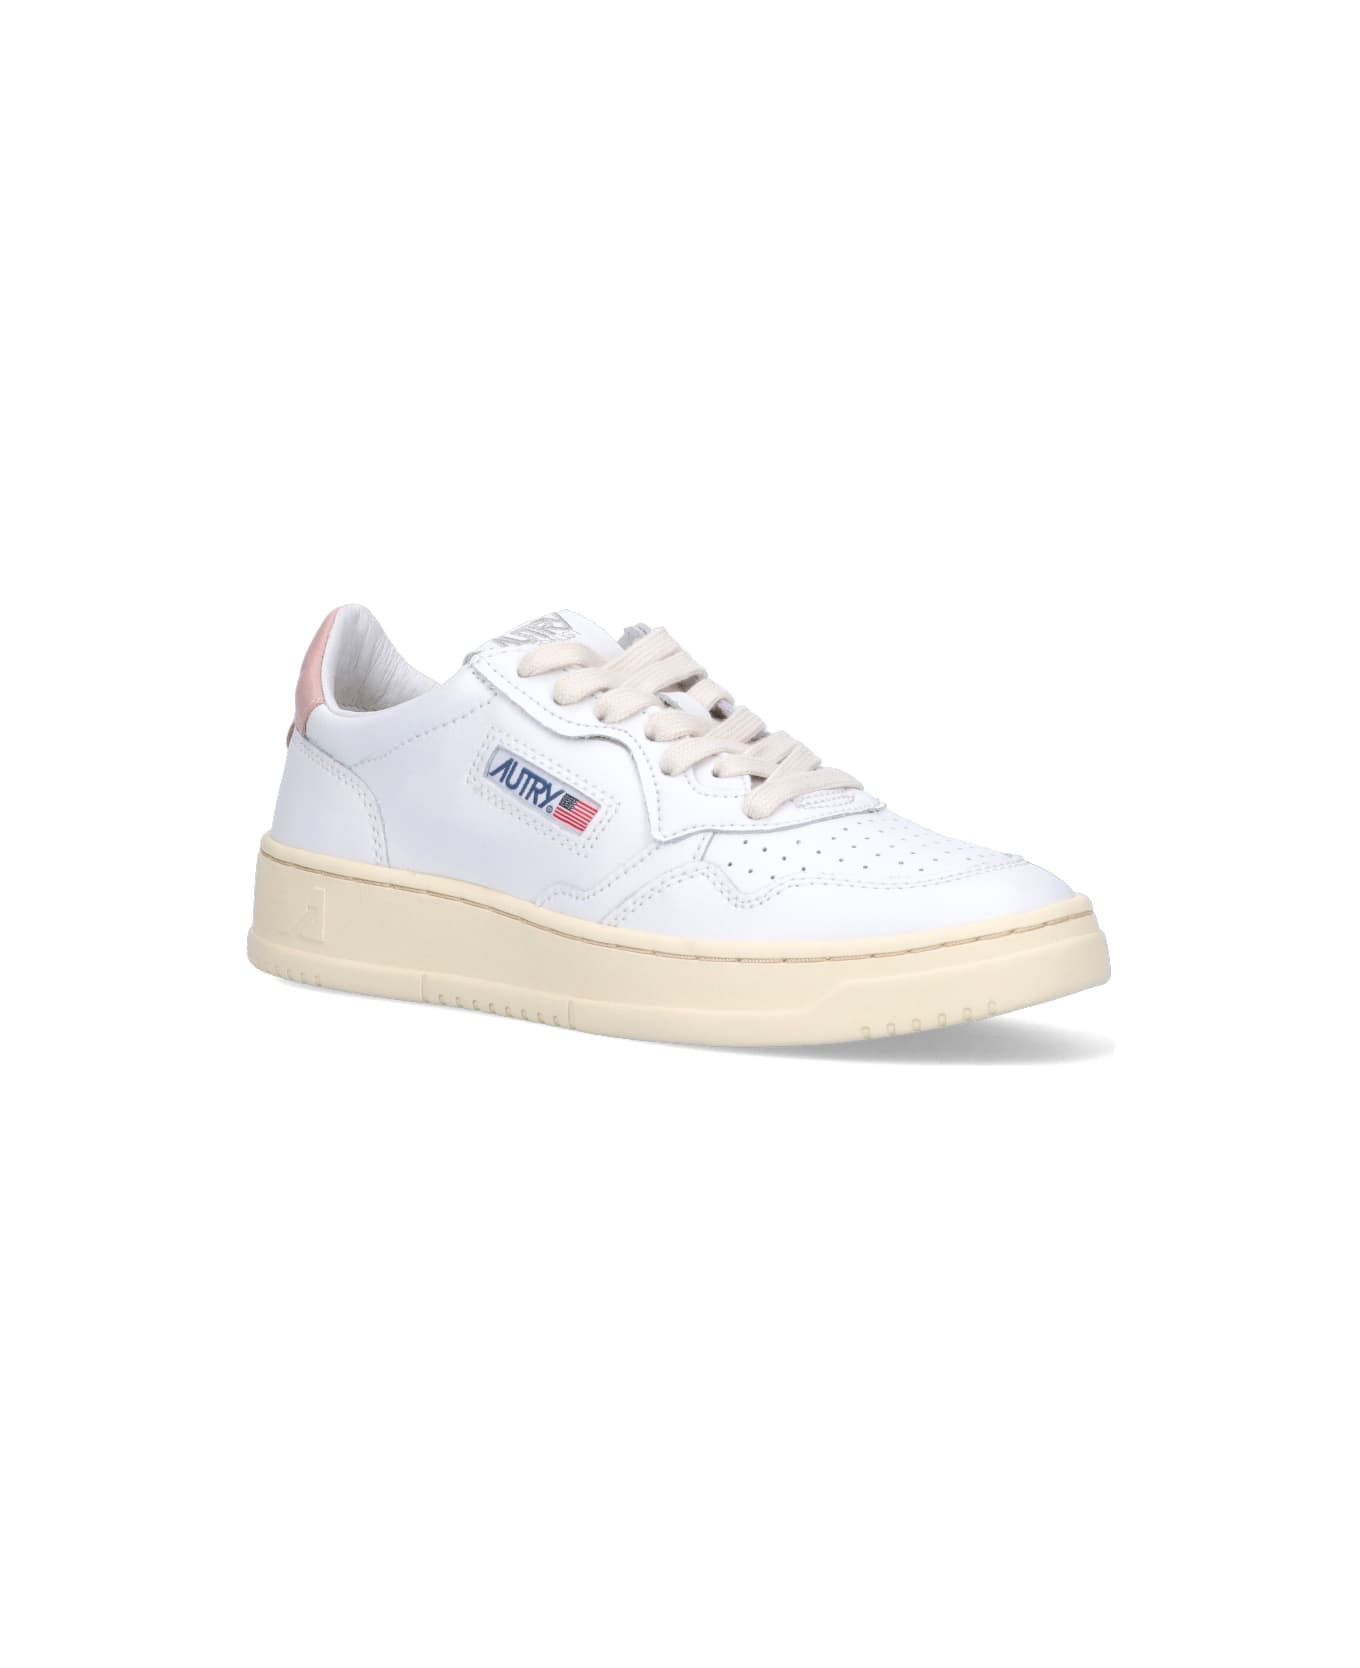 Autry Medalist Low Sneakers - White/pink